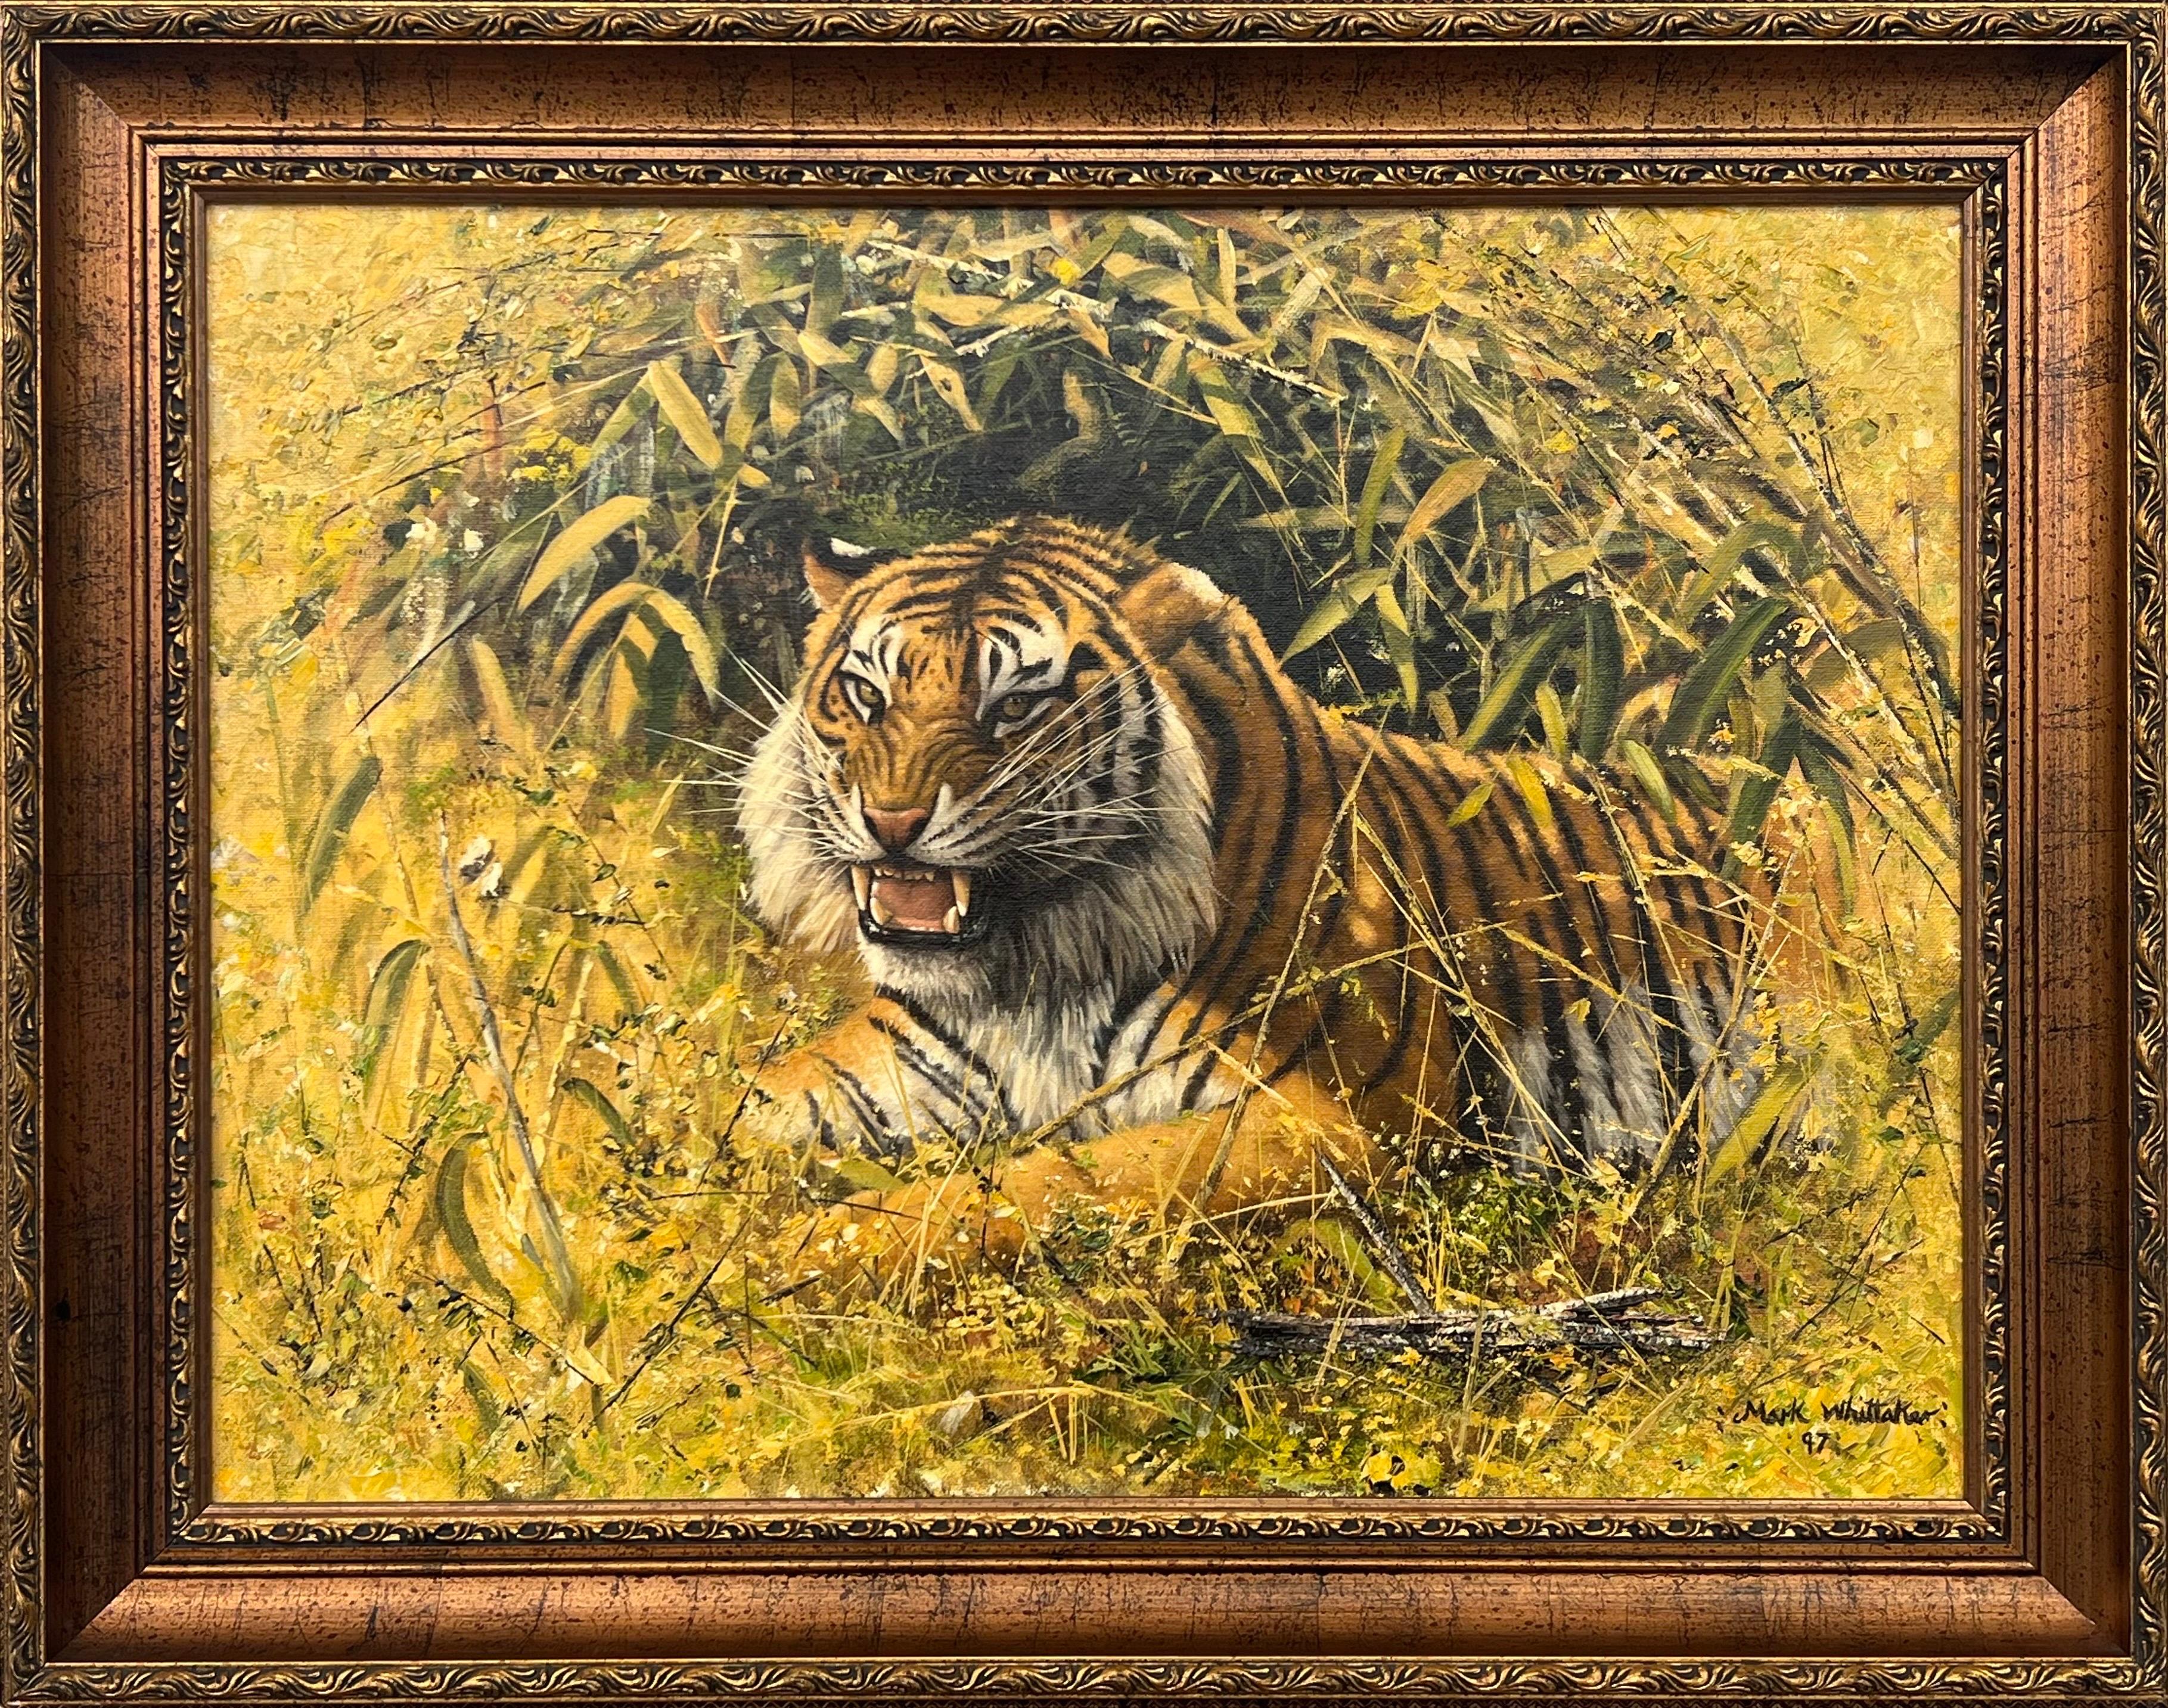 Mark Whittaker Animal Painting - Original Oil Painting of Tiger in the Wild by British Contemporary Artist